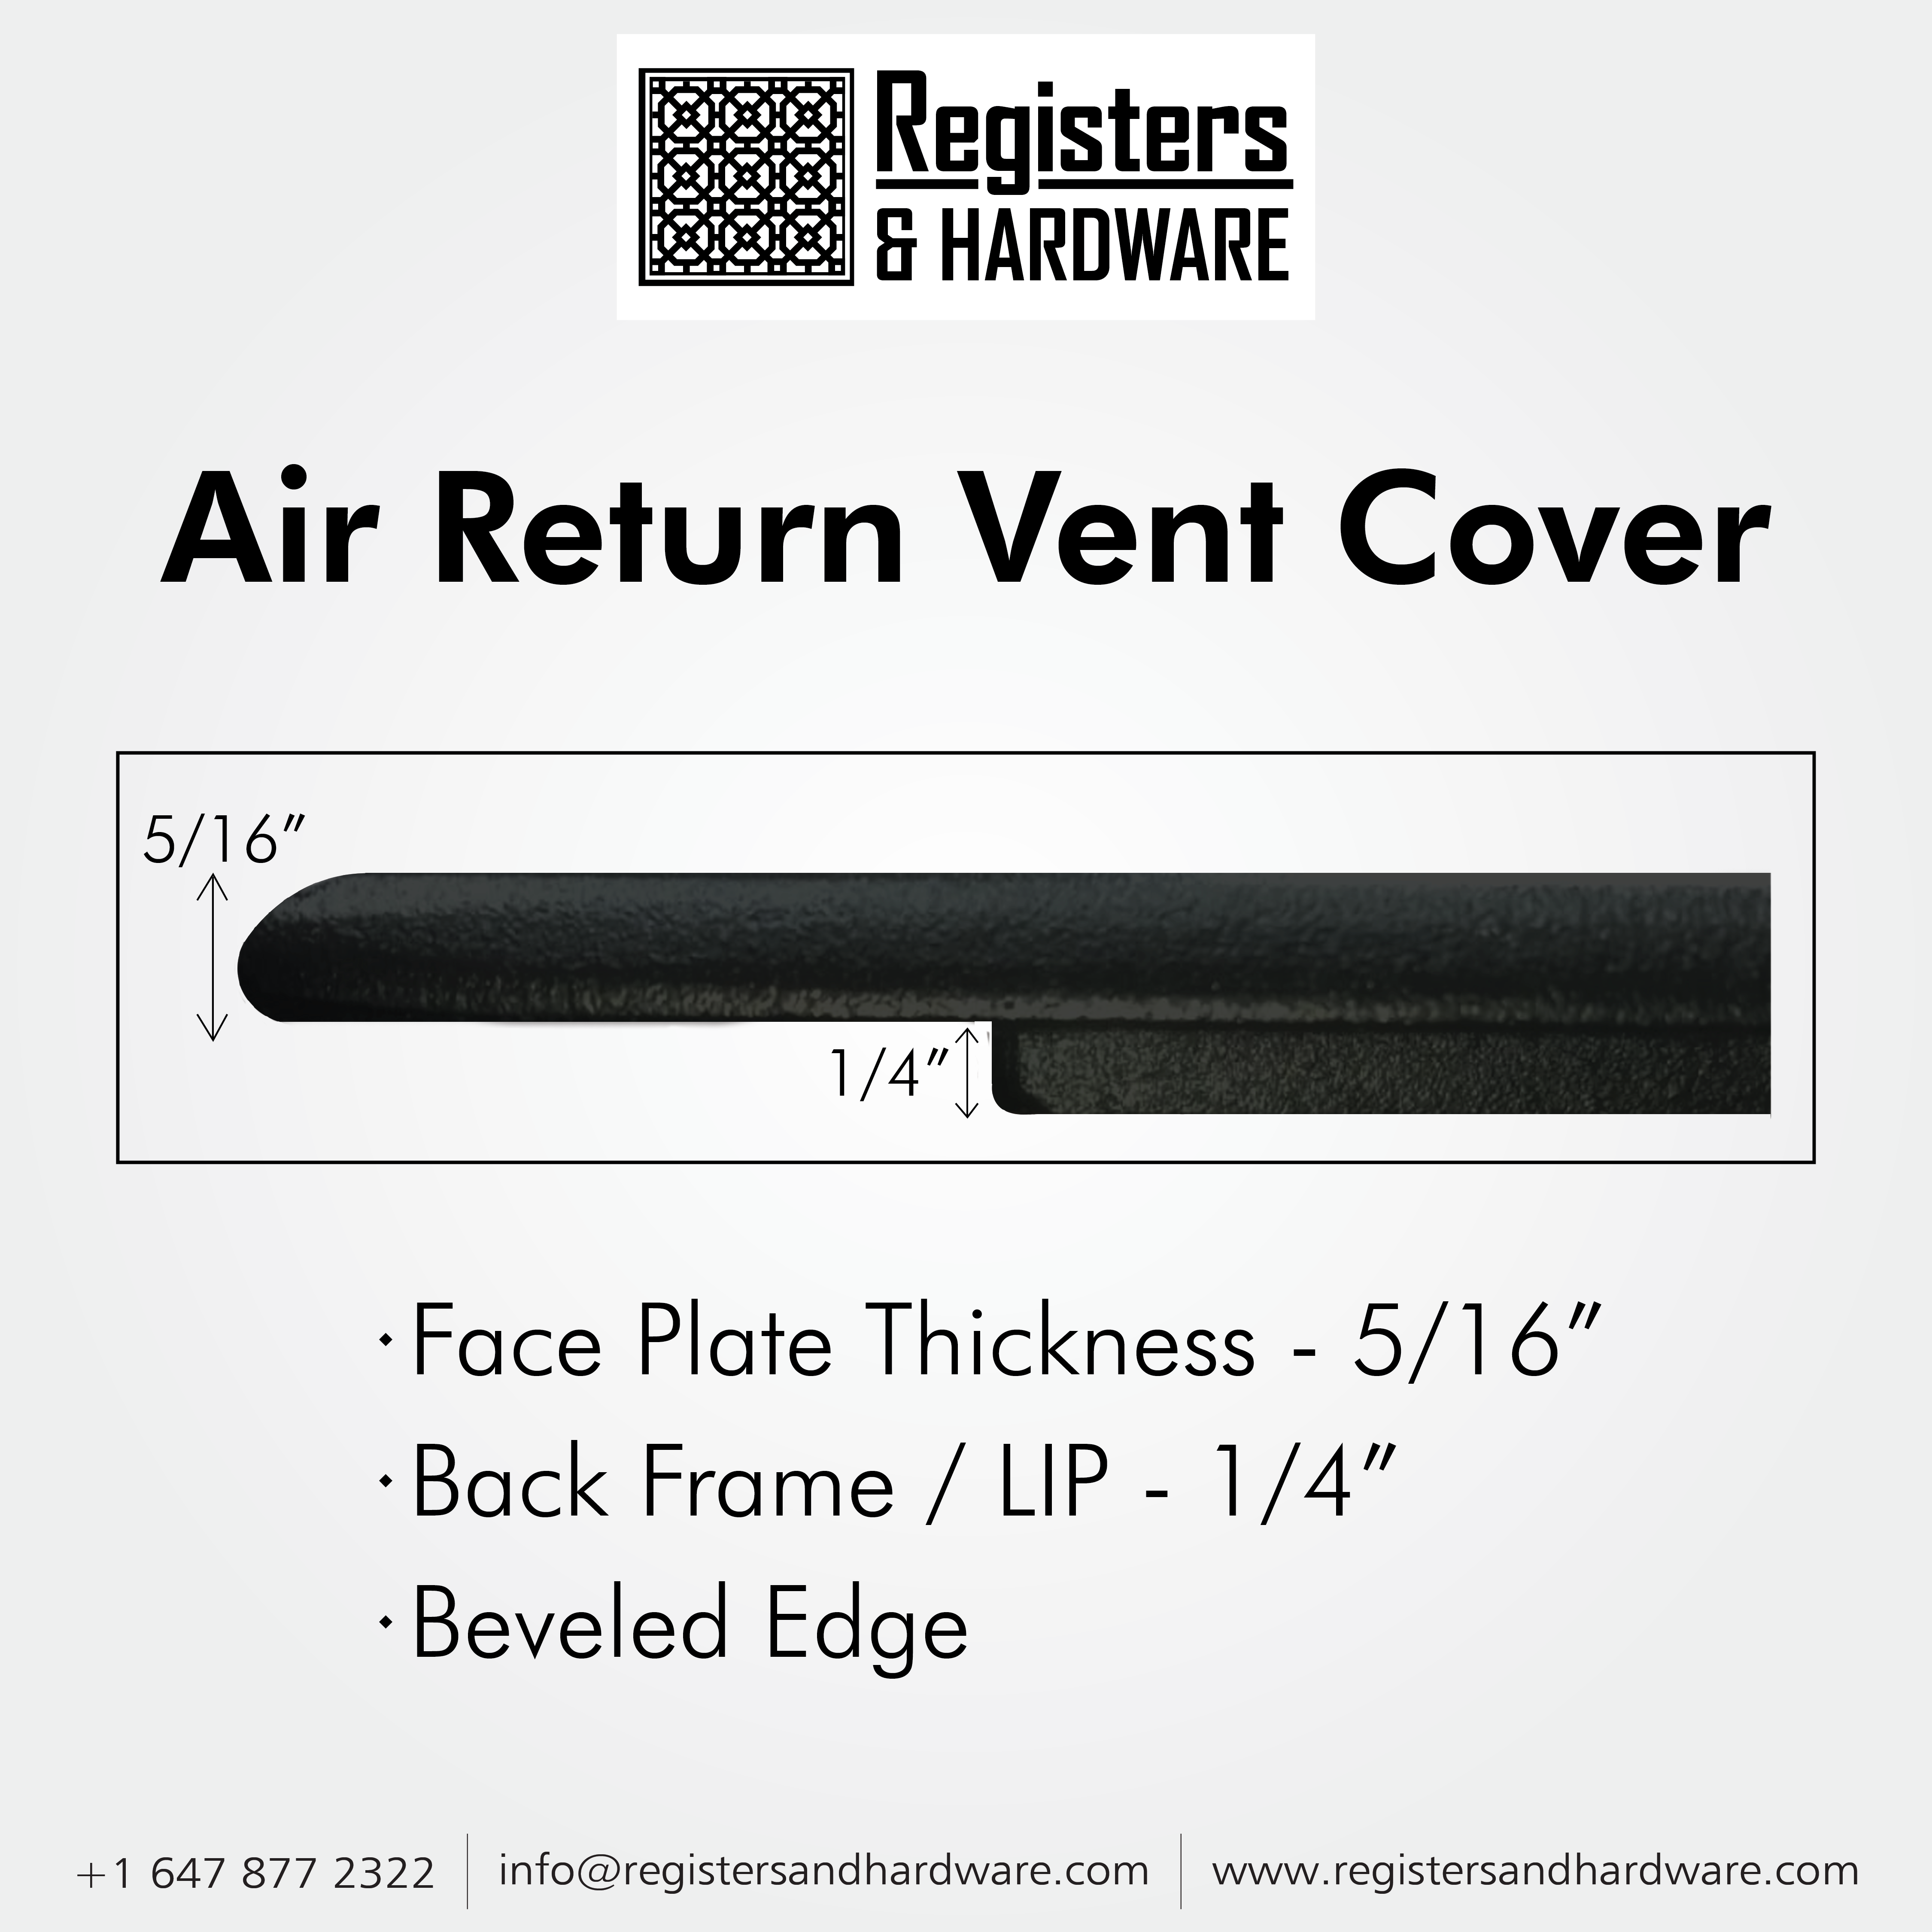 Achtek AIR RETURN 10"x24" Duct Opening (Overall Size 12"x26") | Heavy Cast Aluminum Air Grille HVAC Duct || Powder Coated